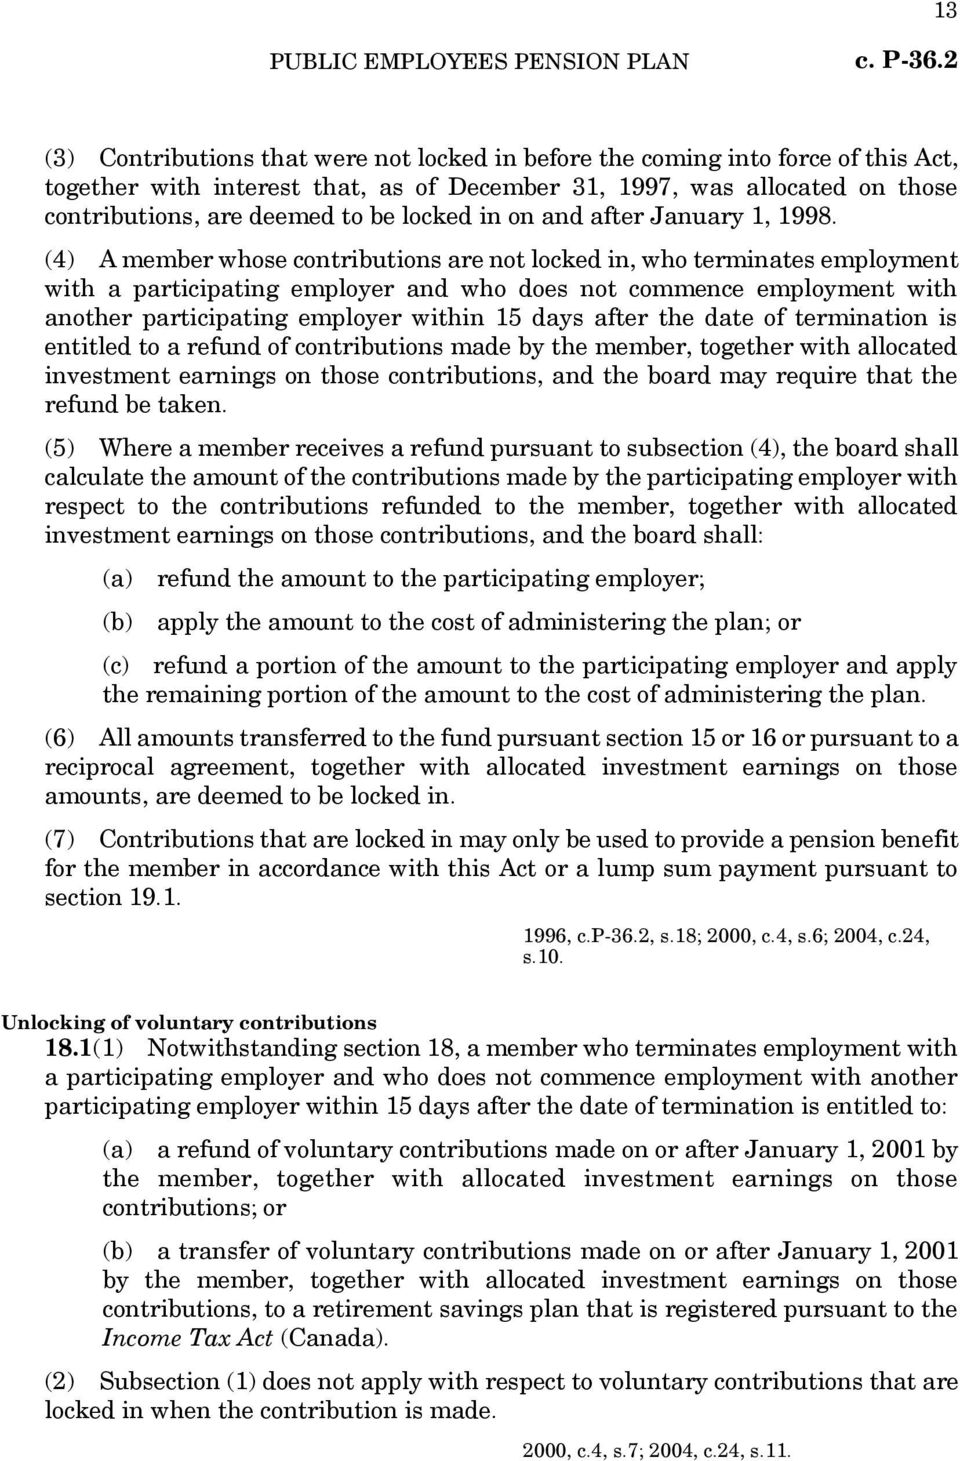 (4) A member whose contributions are not locked in, who terminates employment with a participating employer and who does not commence employment with another participating employer within 15 days